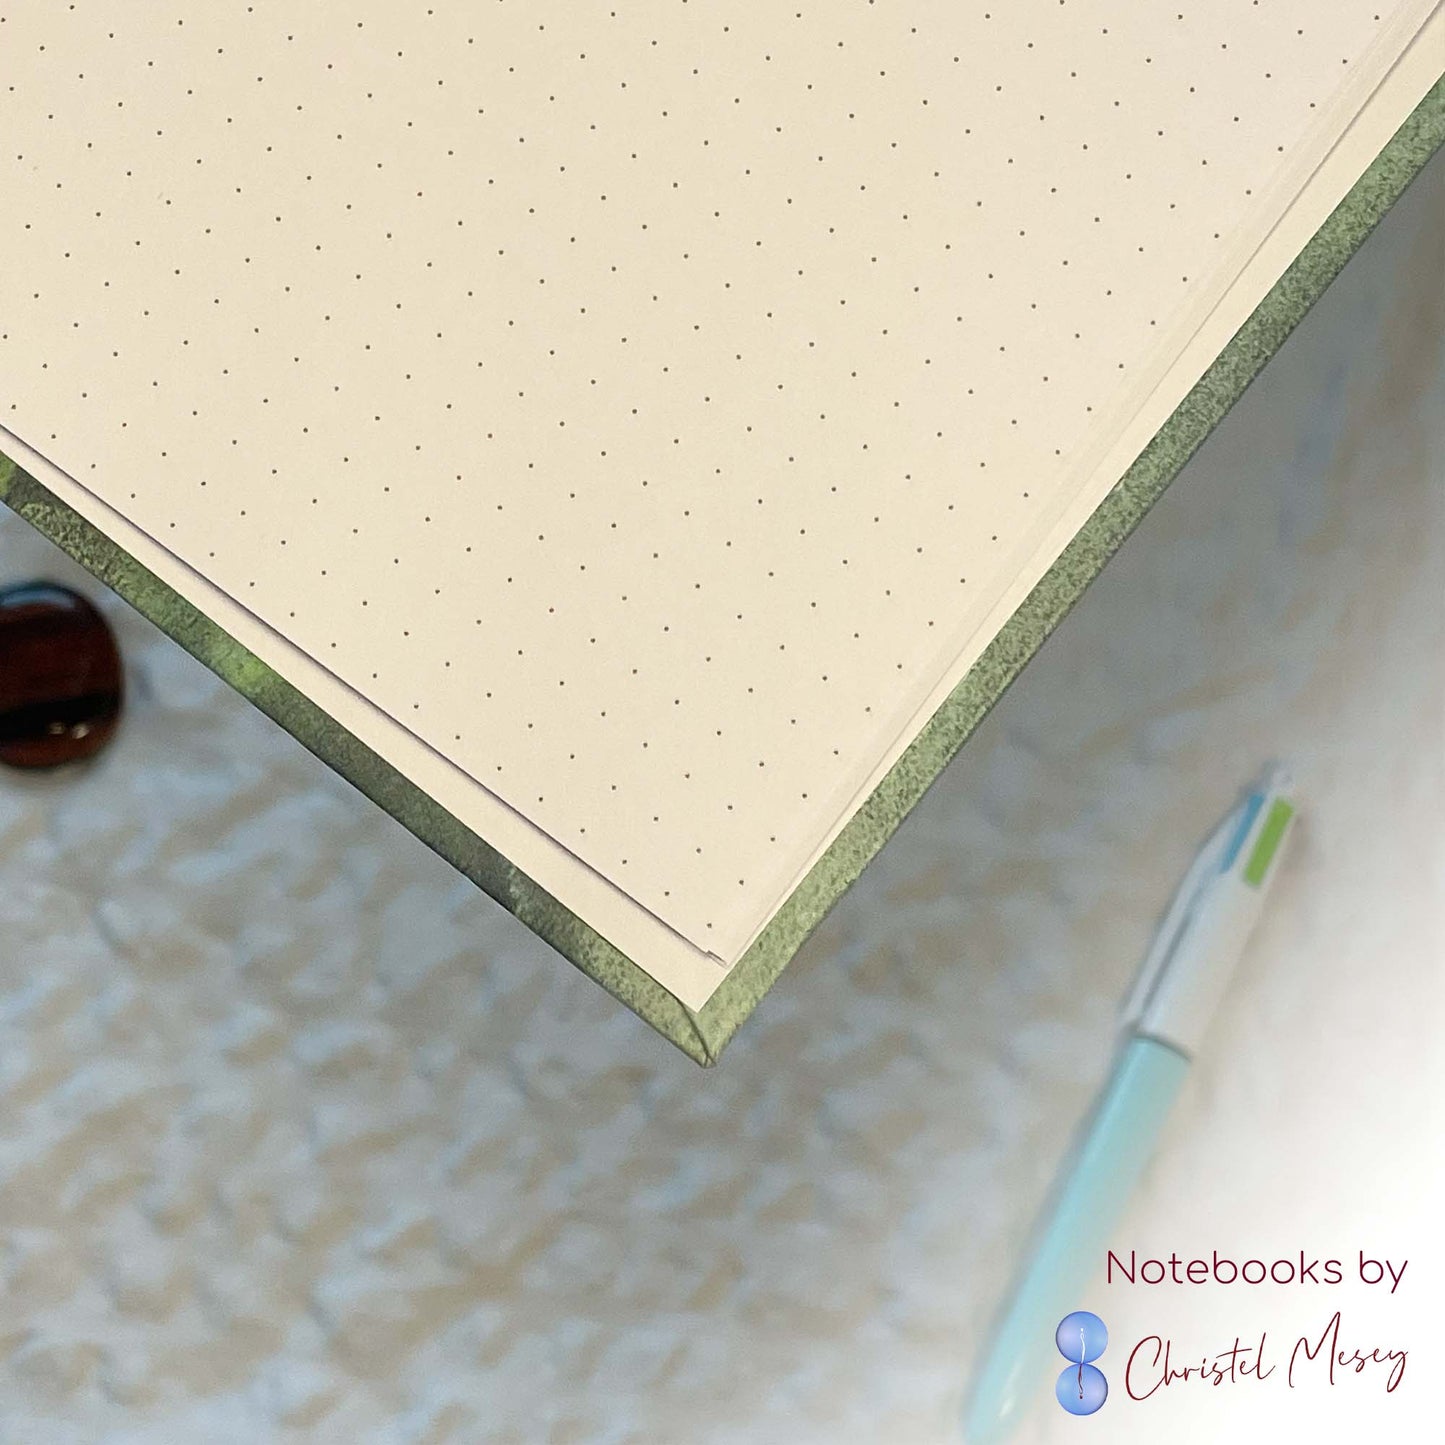 Healing Nature - Notebook with dotted pages - Christel Mesey Art